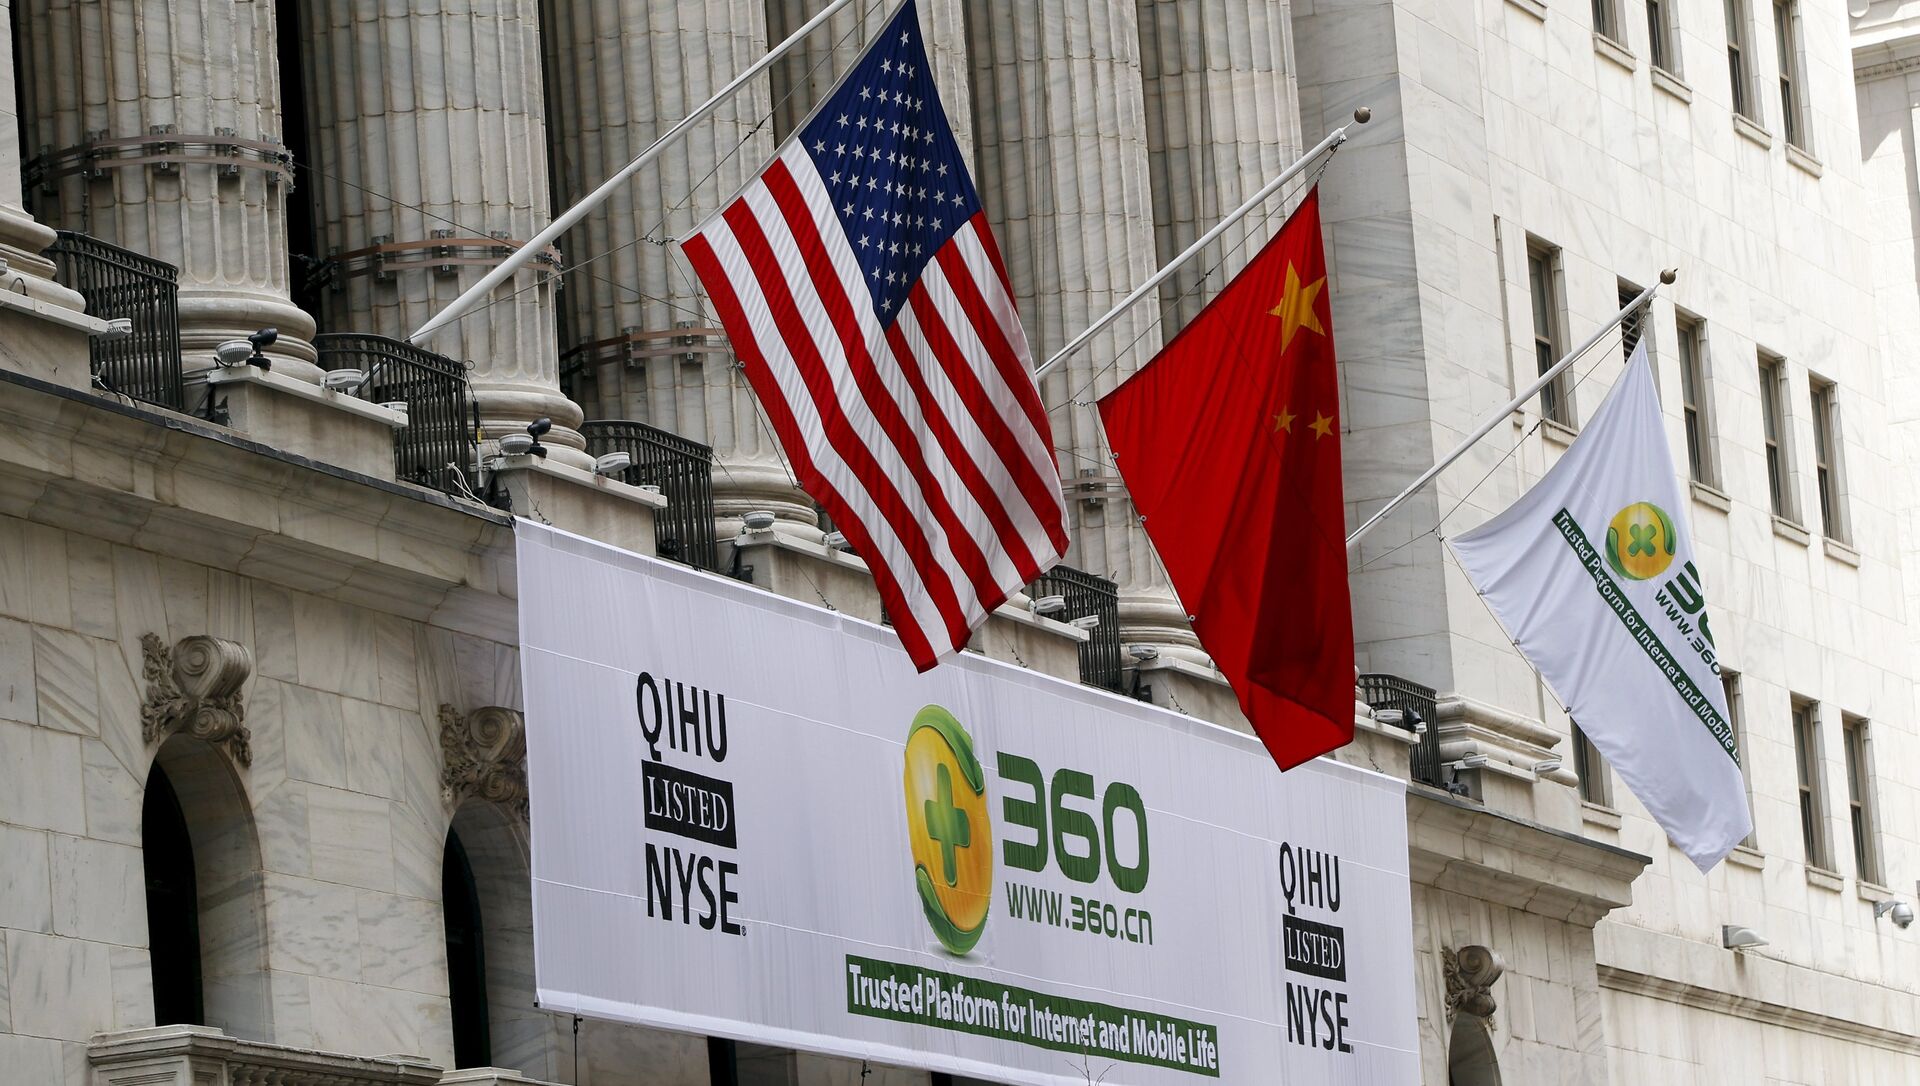 A sign advertising the Qihoo 360 Technology Co Ltd is hung with the U.S. and Chinese flags outside of the New York Stock Exchange before the company's Initial Public Offering (IPO) in New York in this March 30, 2011 file picture - Sputnik International, 1920, 28.07.2021